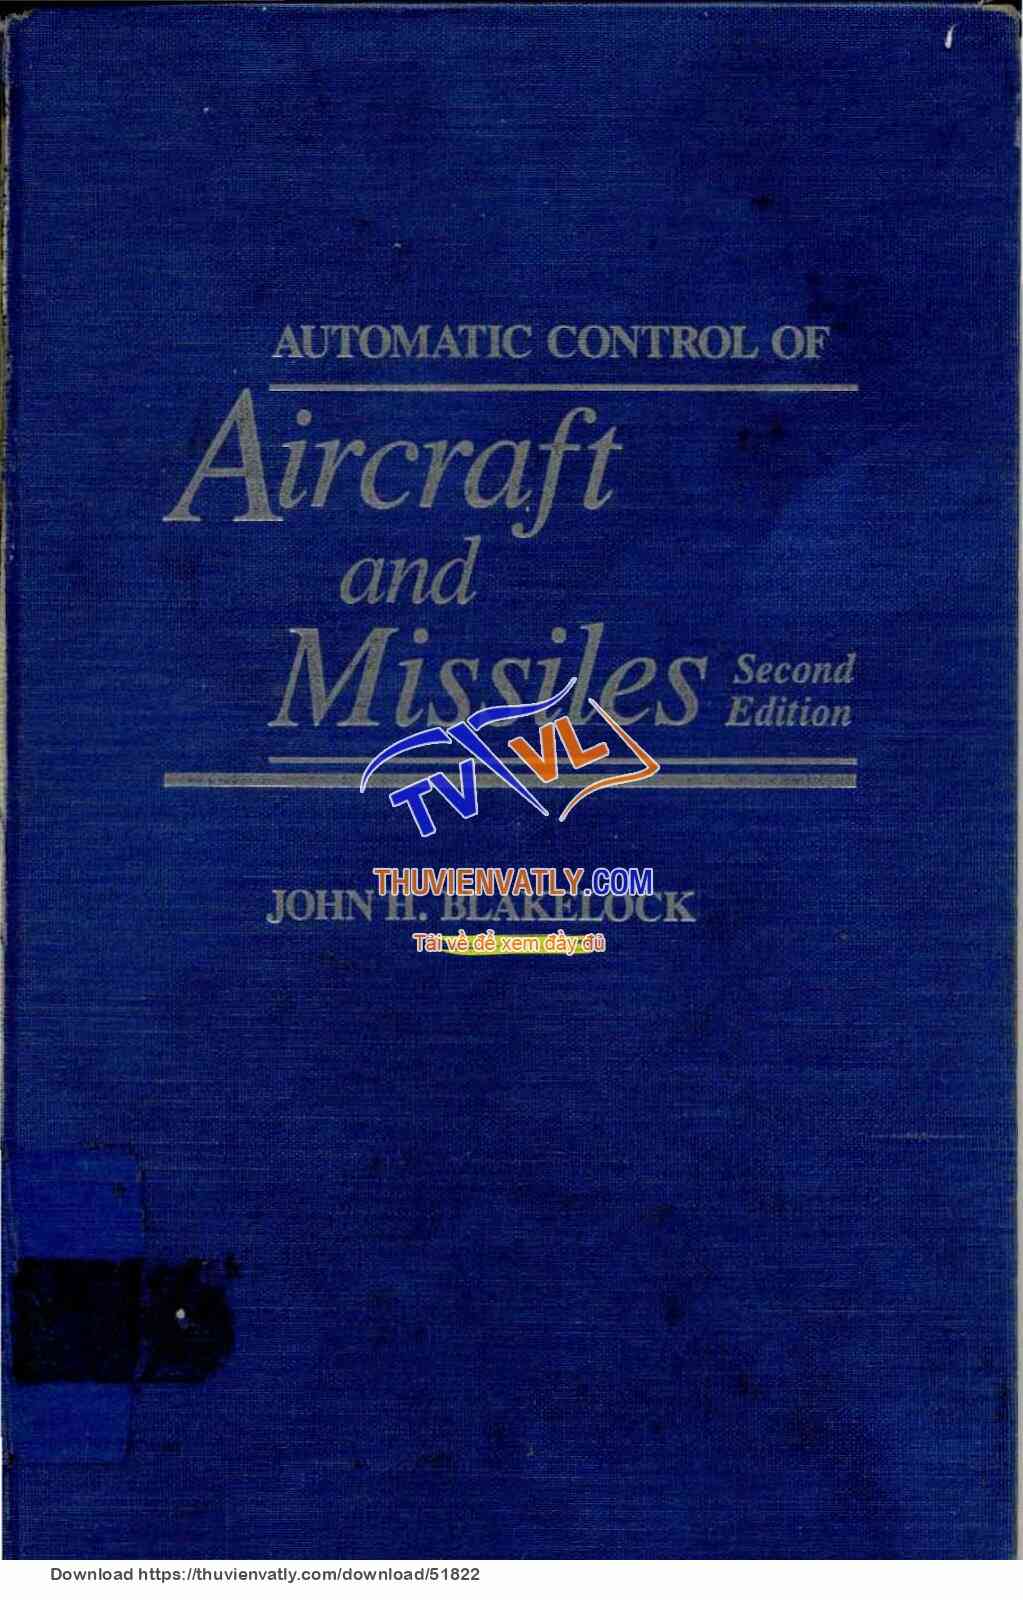 Automatic control of aircraft and missile